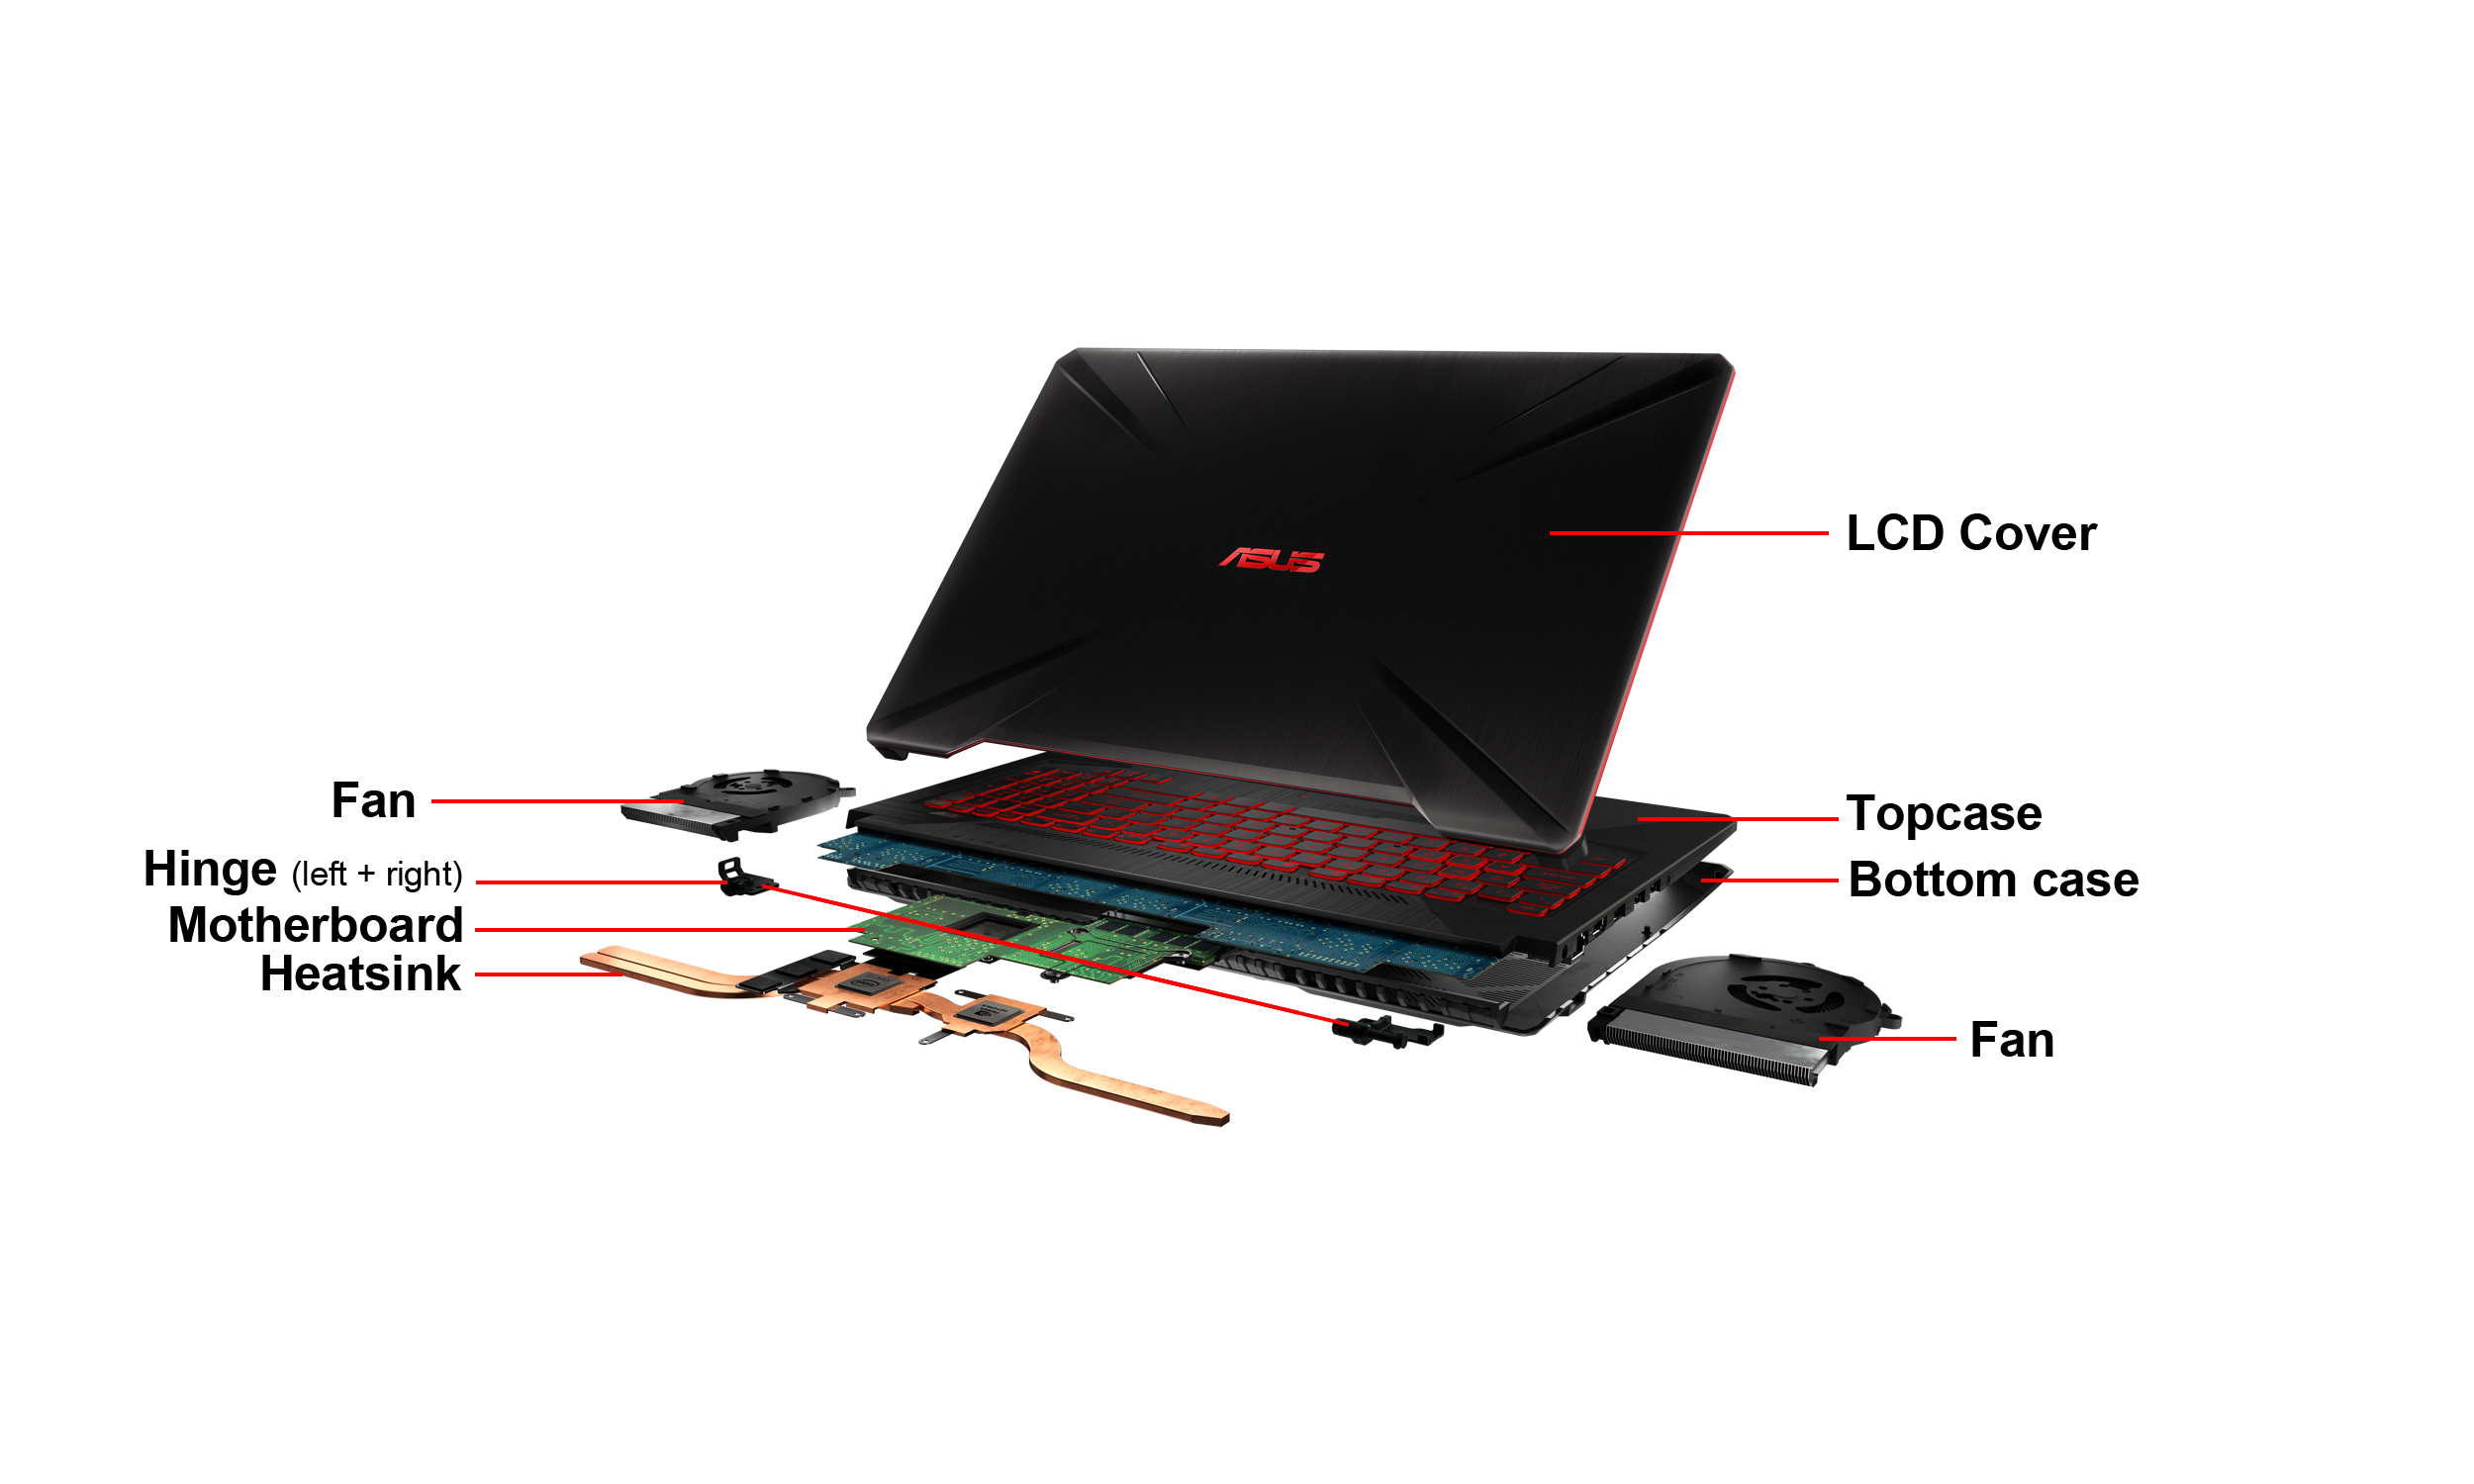 rear view of asus laptop components